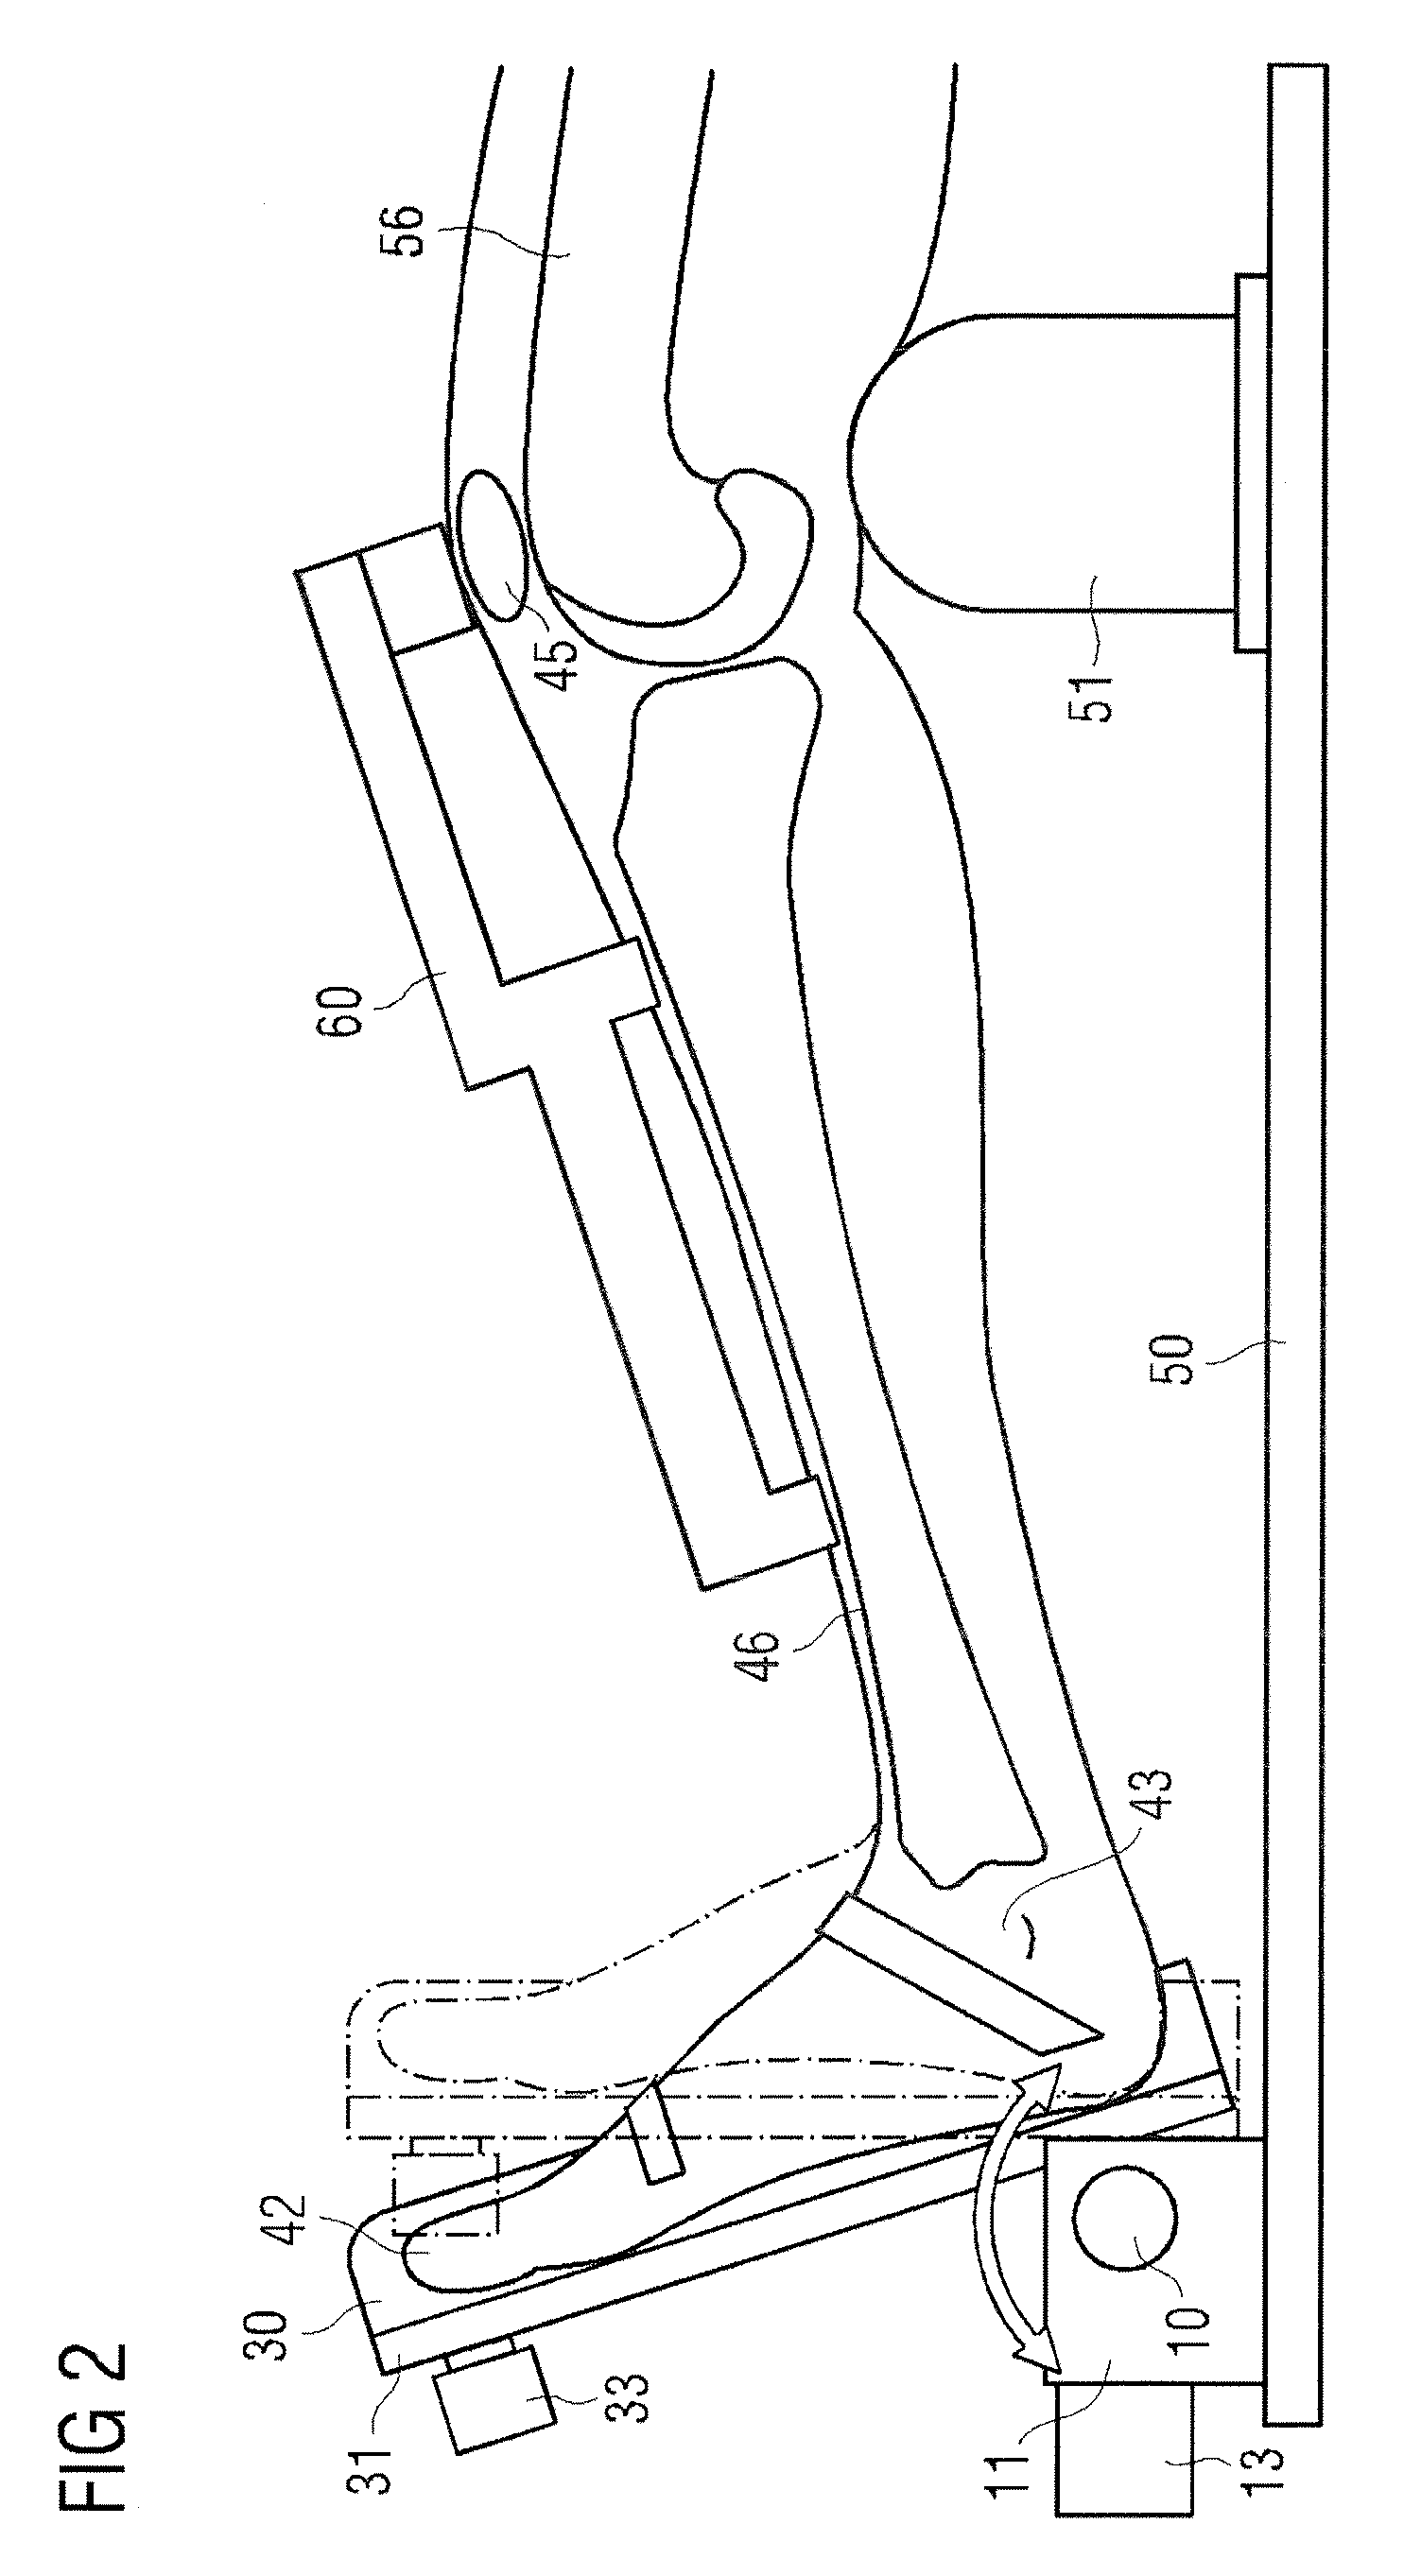 Device and method for knee ligament strain measurement